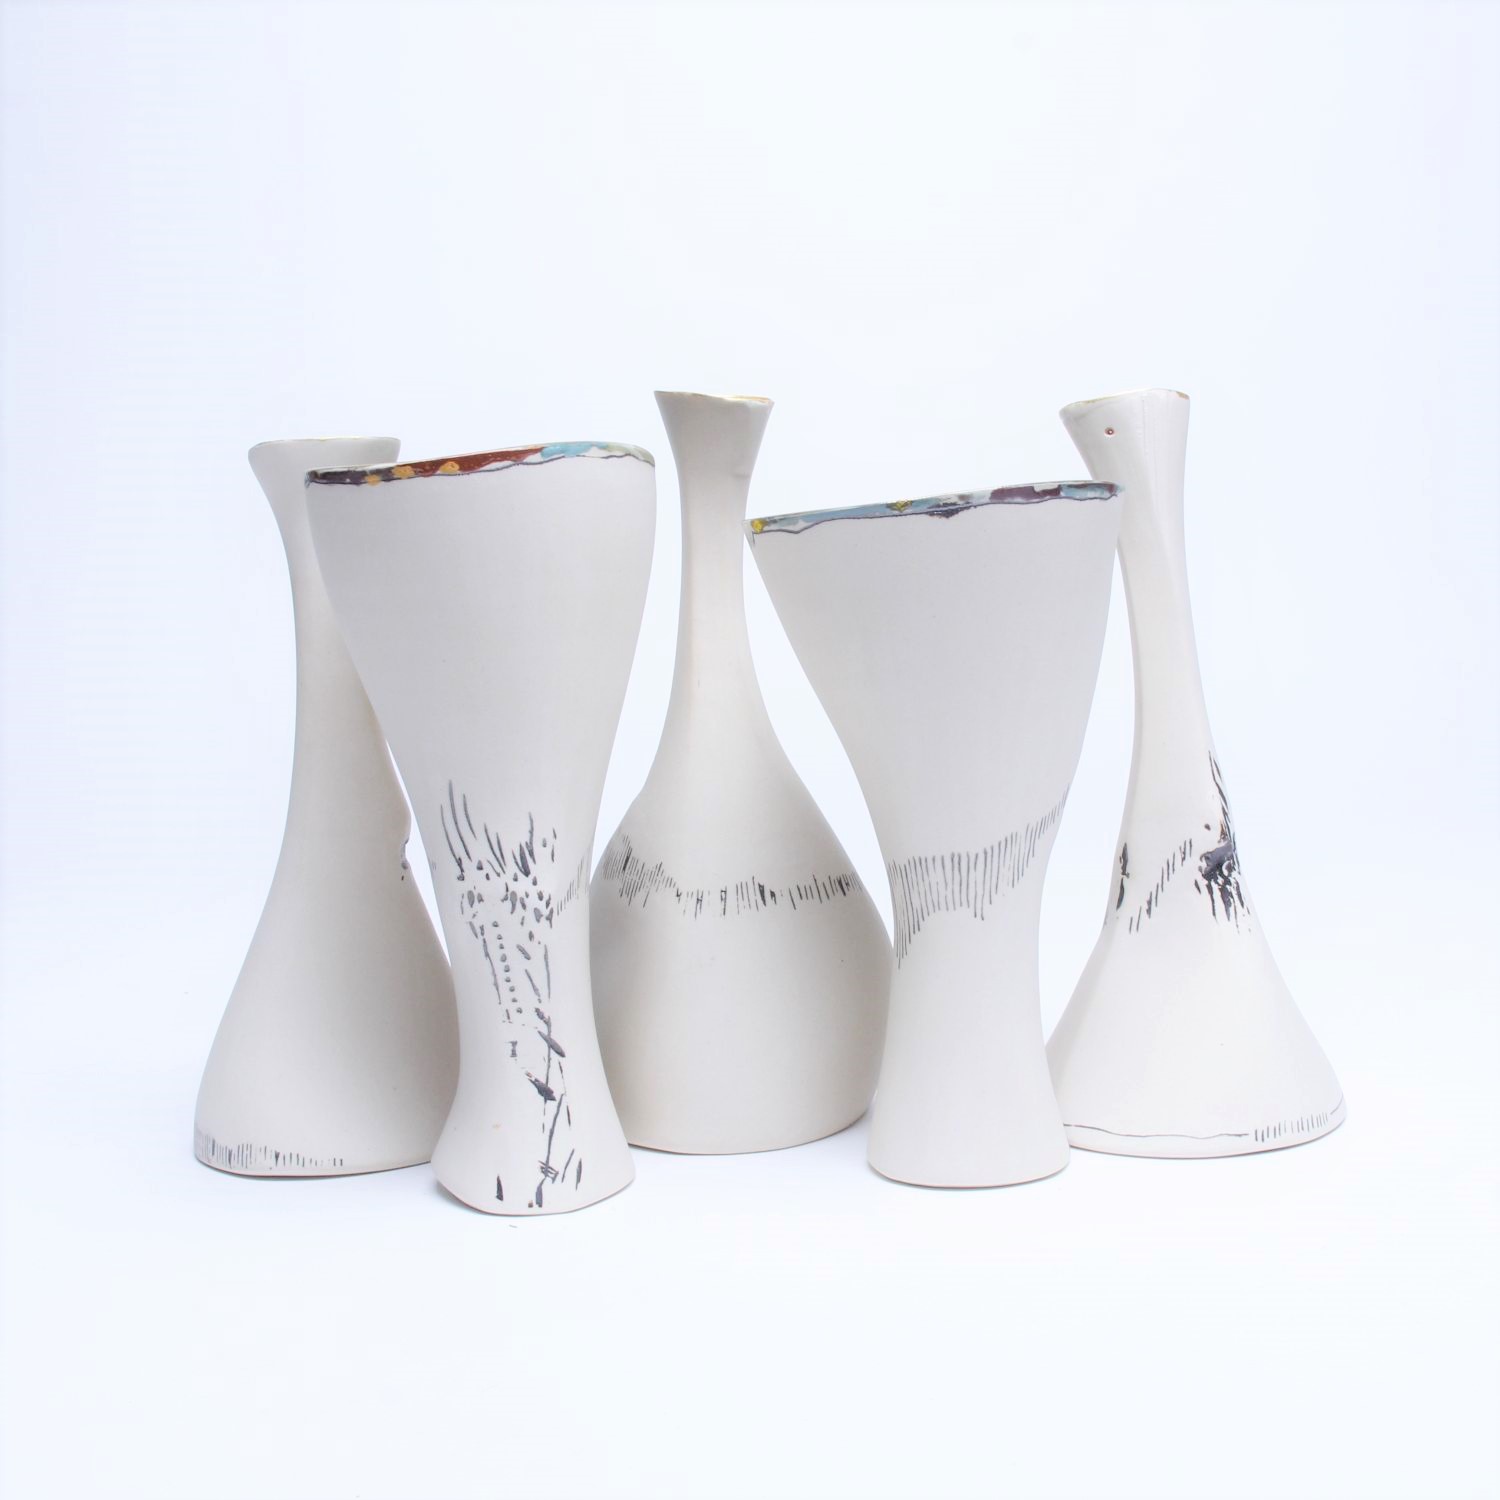 Jane Wilson: Vase (Each sold separately) Product Image 1 of 9